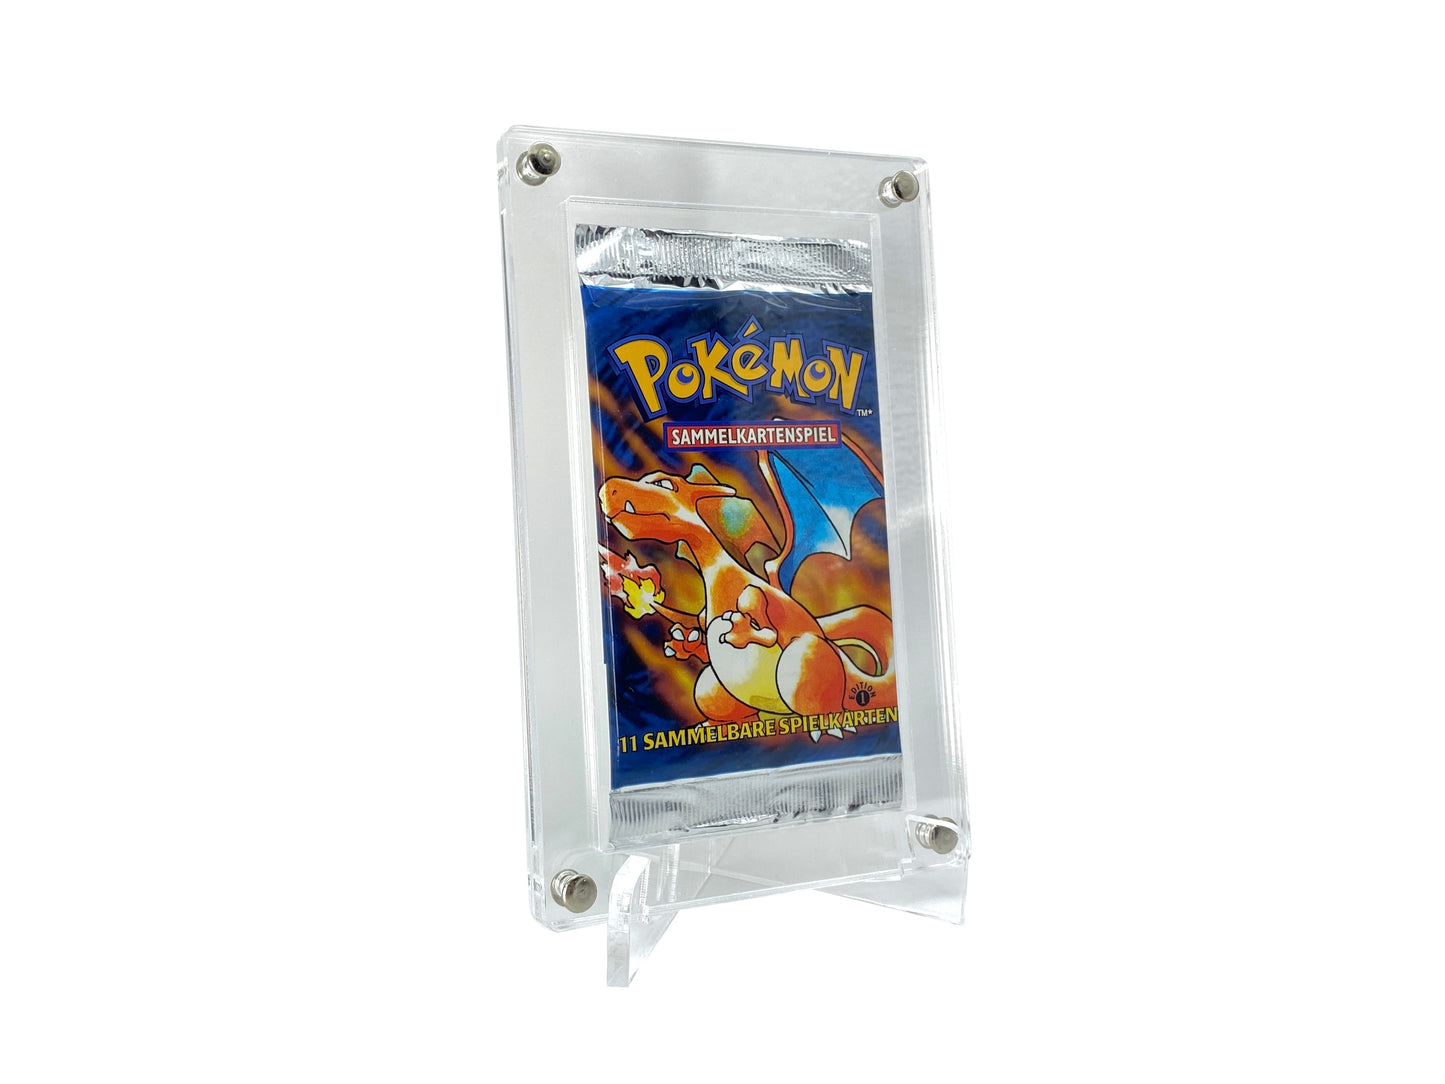 Acrylic stand for boosters, single cards and graded cards - for example Pokemon or PSA cards